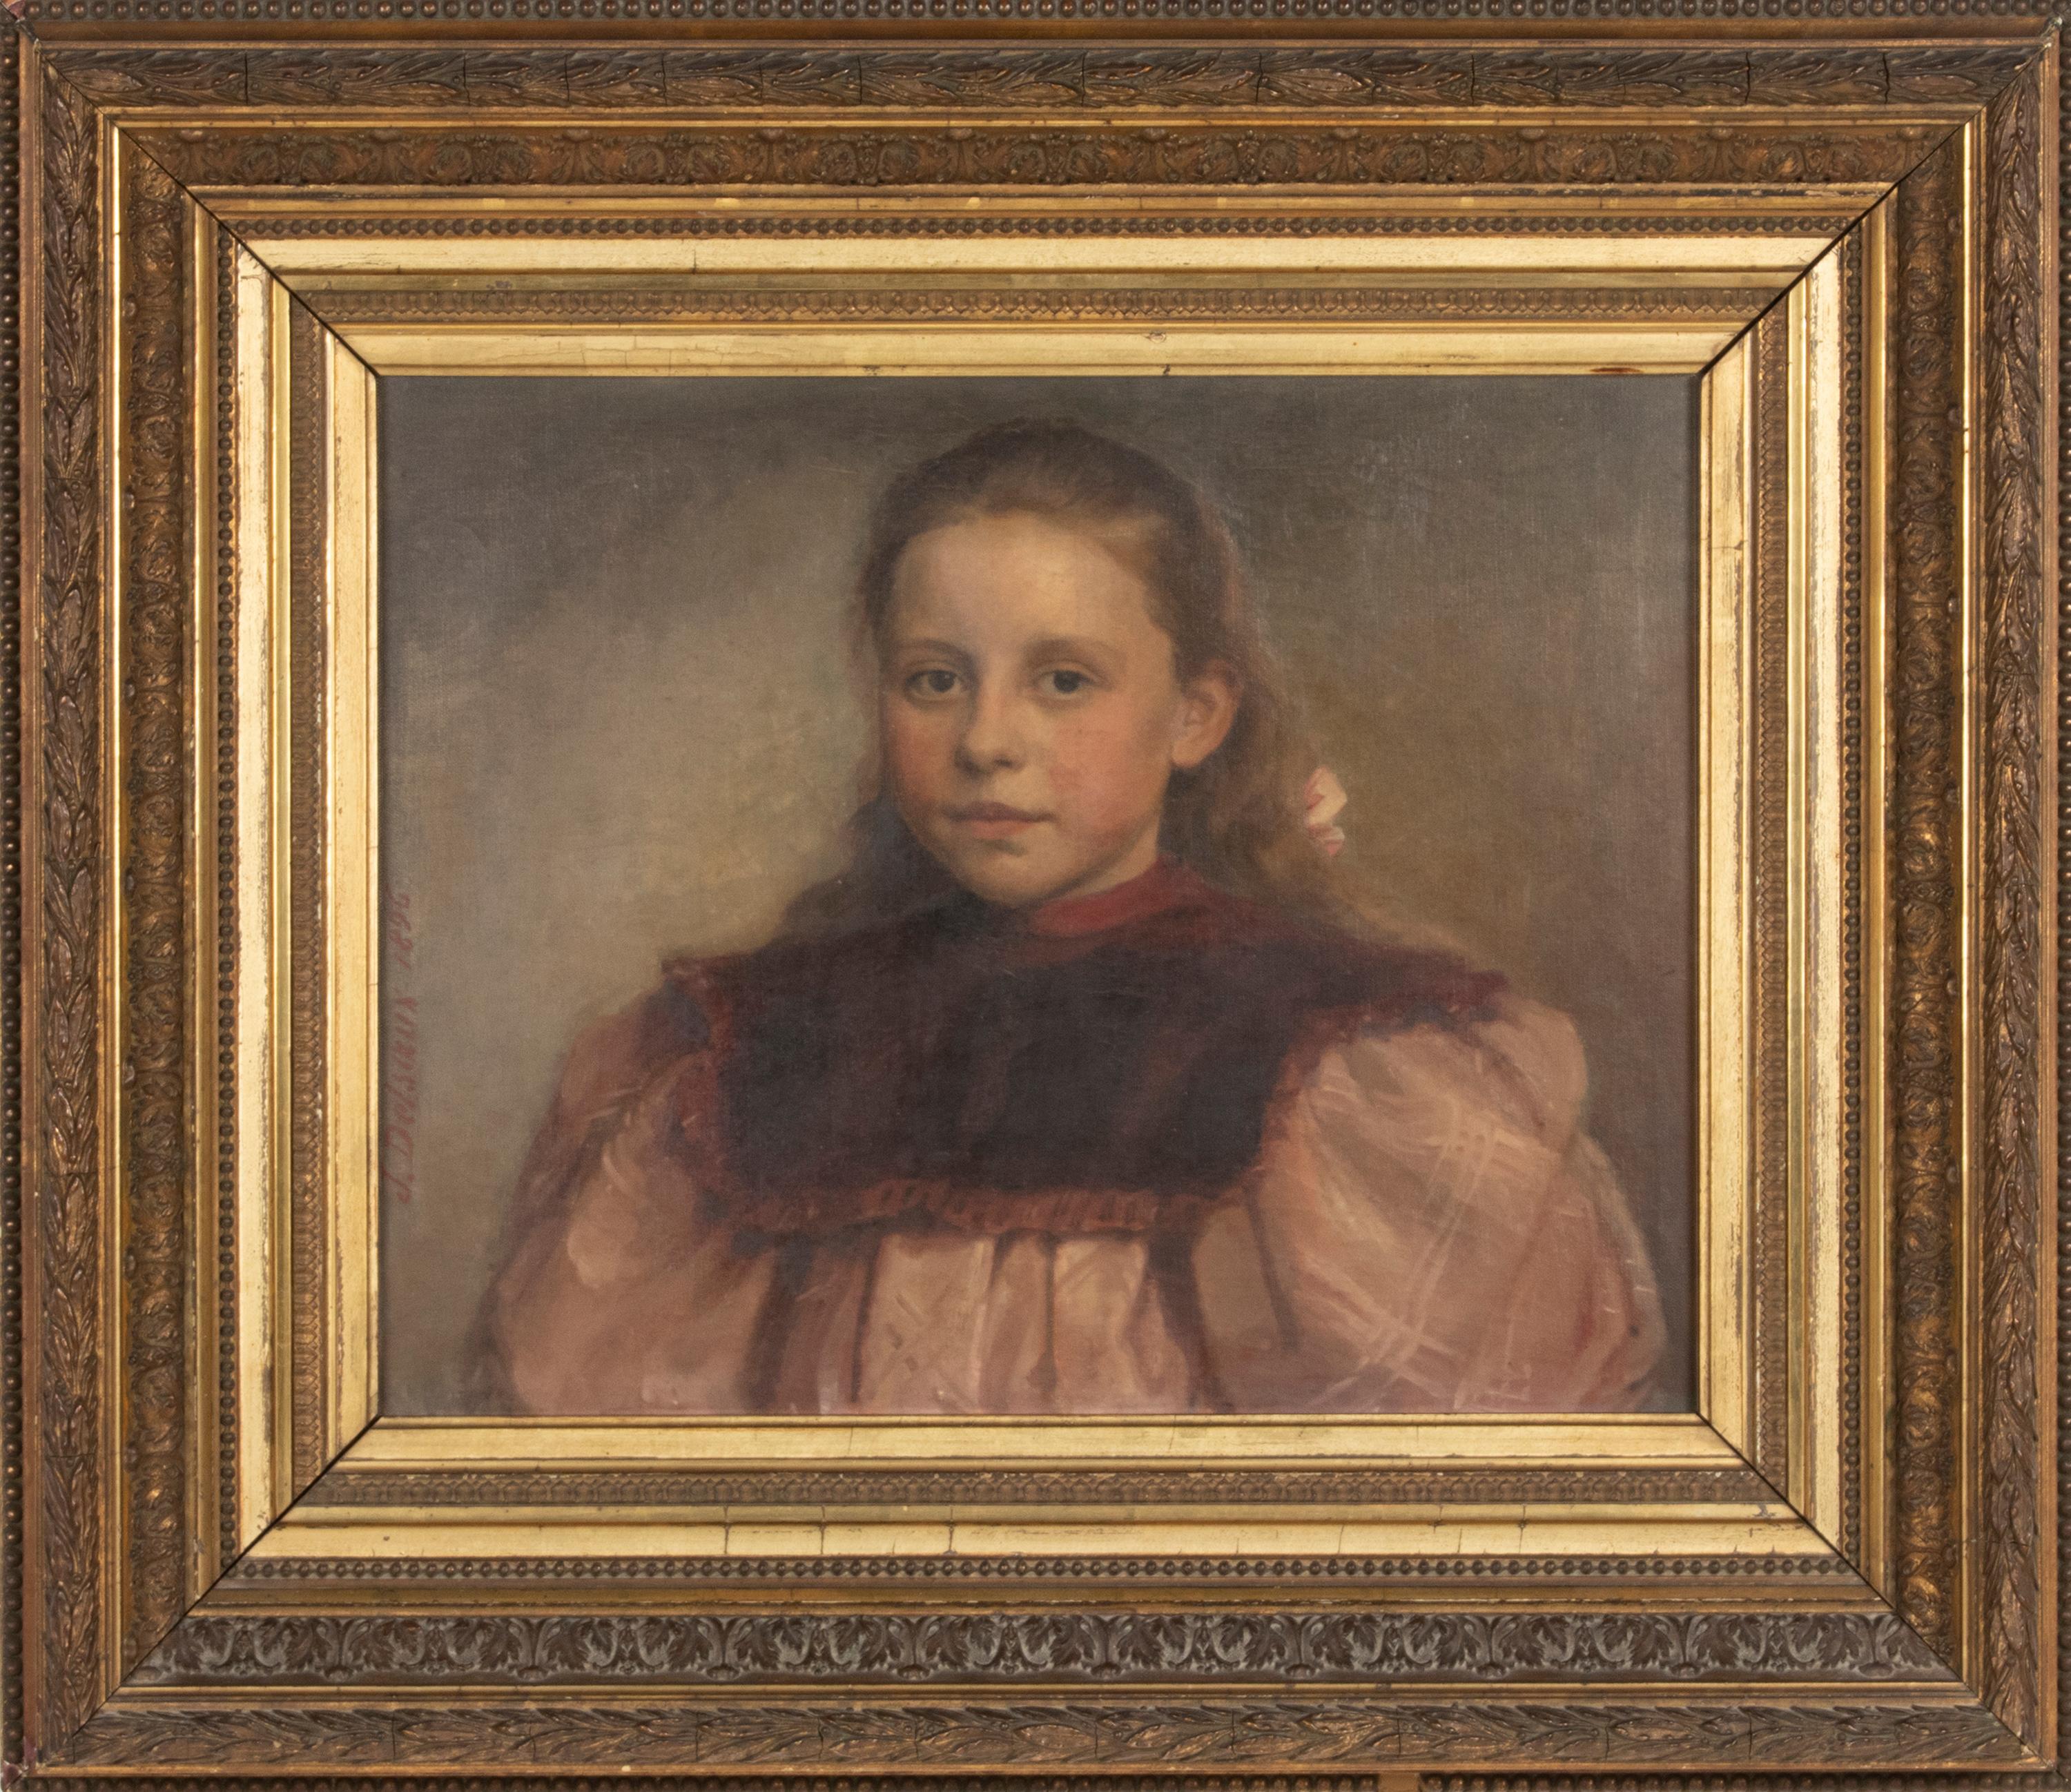 Jeremie DELSAUX. Glain, Belgium 1852 - Liège 1927.
An antique oil painting on canvas, a portrait of a young girl with a hairbow. It was painted by Jeremie DELSAUX and dated 1896. Oil on canvas. In a wooden frame with gilded plaster.
Frame: 67 x 76